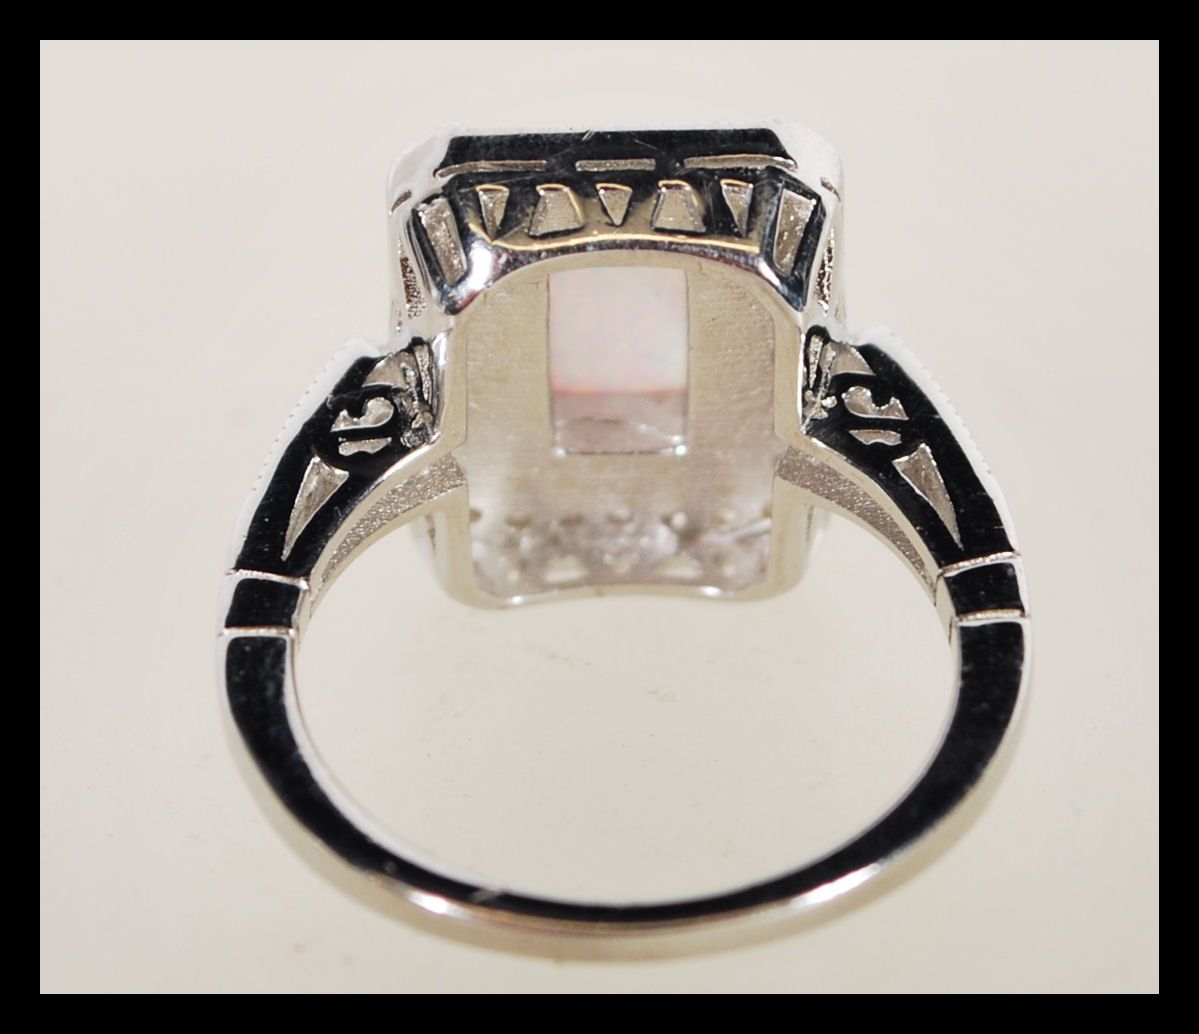 A sterling silver Art Deco style ring having a central opal panel and decorated with CZ stones. - Image 4 of 4